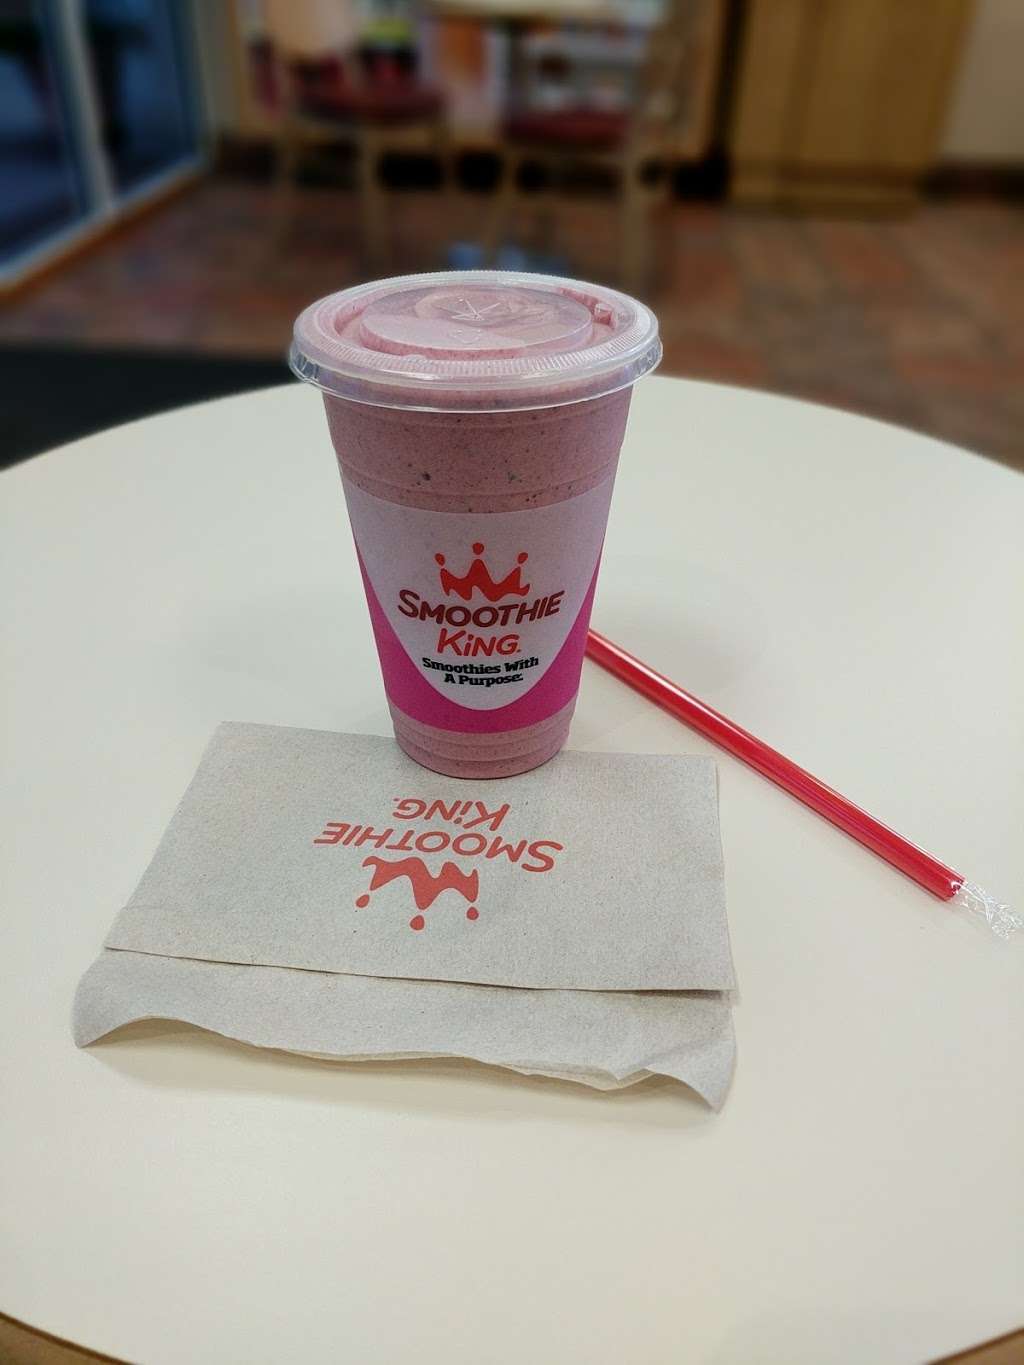 Smoothie King | 6586 Woodway Dr, Houston, TX 77057 | Phone: (713) 467-0500